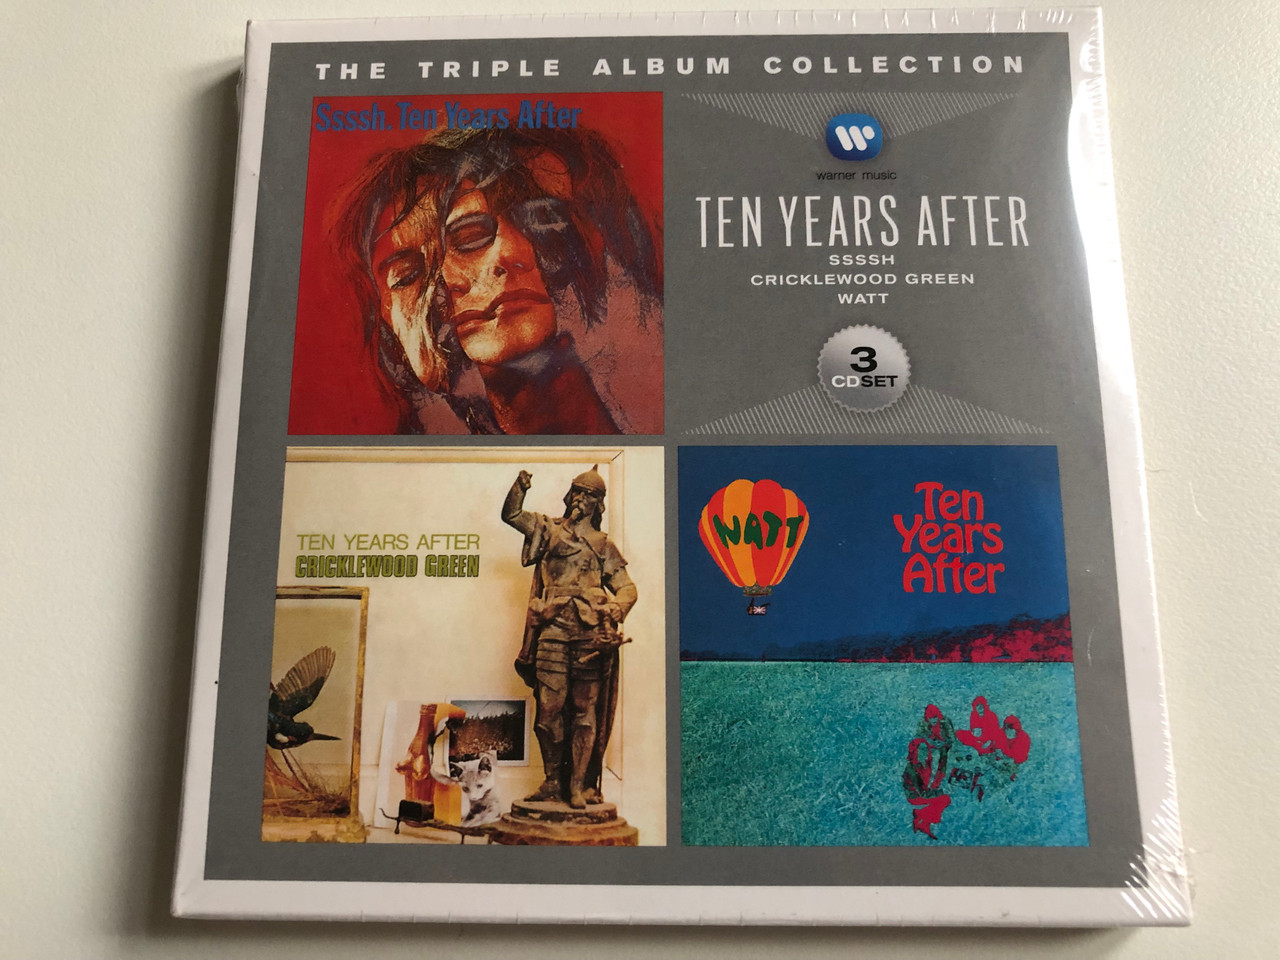 The Triple Album Collection - Ten Years After - Ssssh, Cricklewood Green,  Watt / The Triple Album Collection / Warner Music 3x Audio CD 2014 /  825646184033 - Bible in My Language